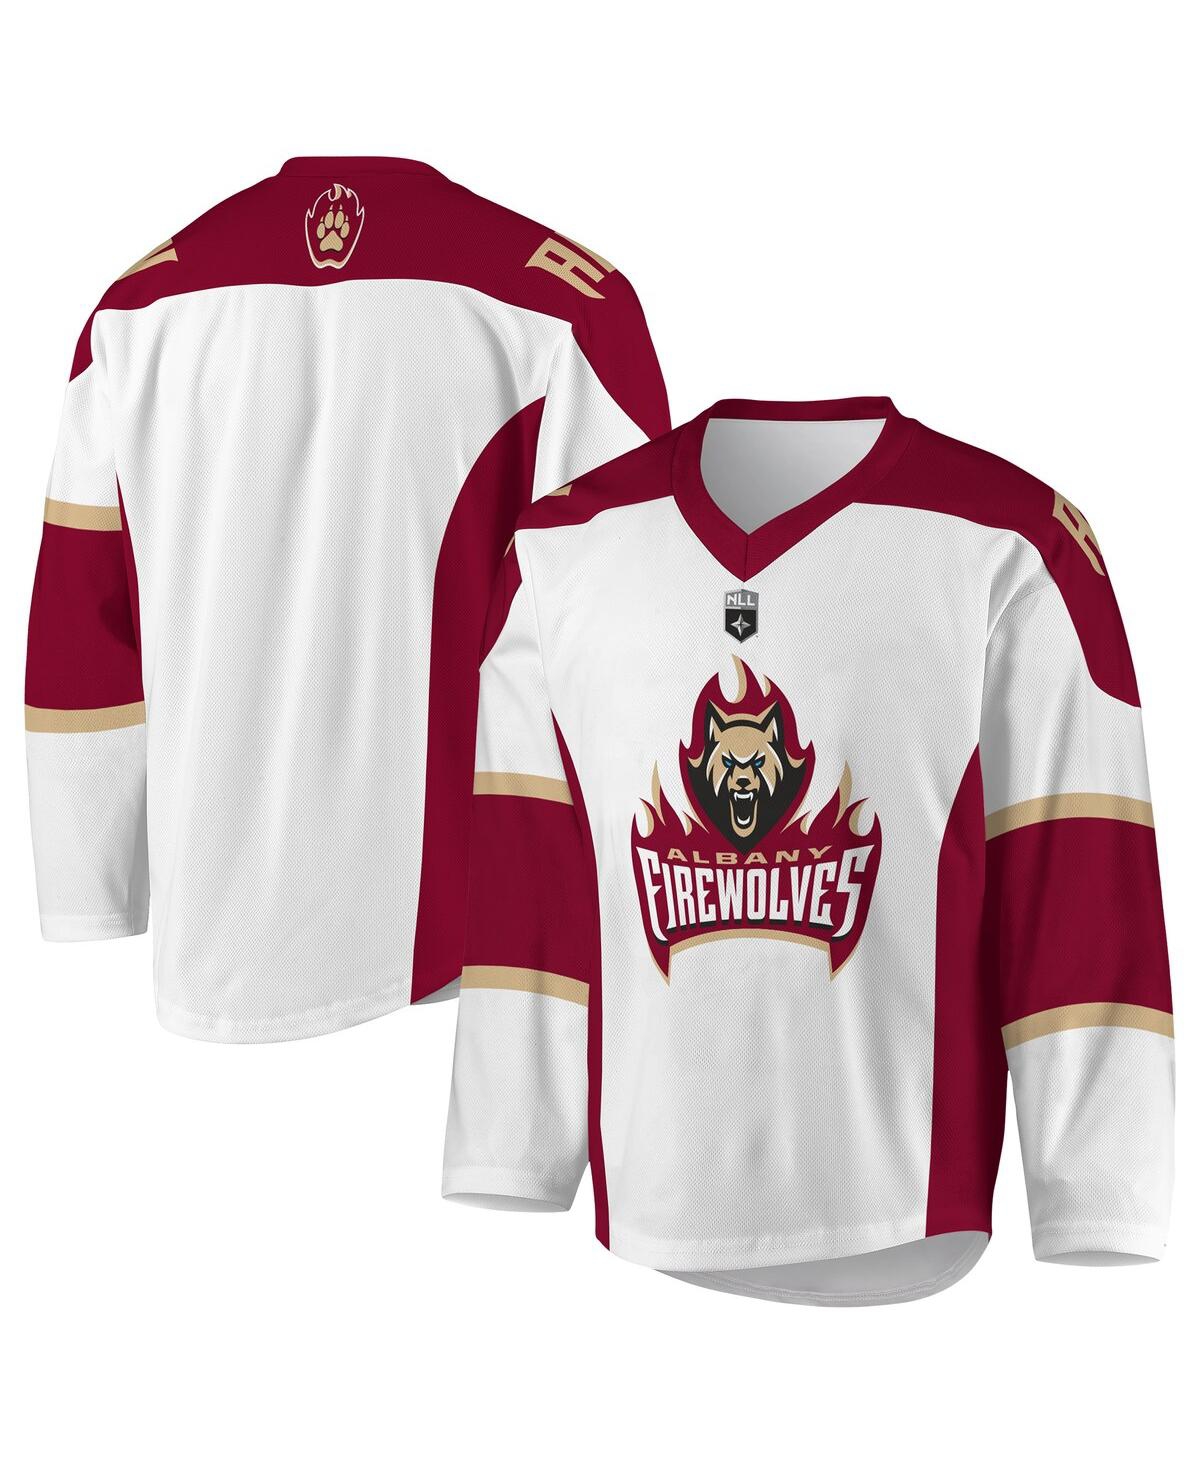 Men's White Albany FireWolves Sublimated Replica Jersey - White